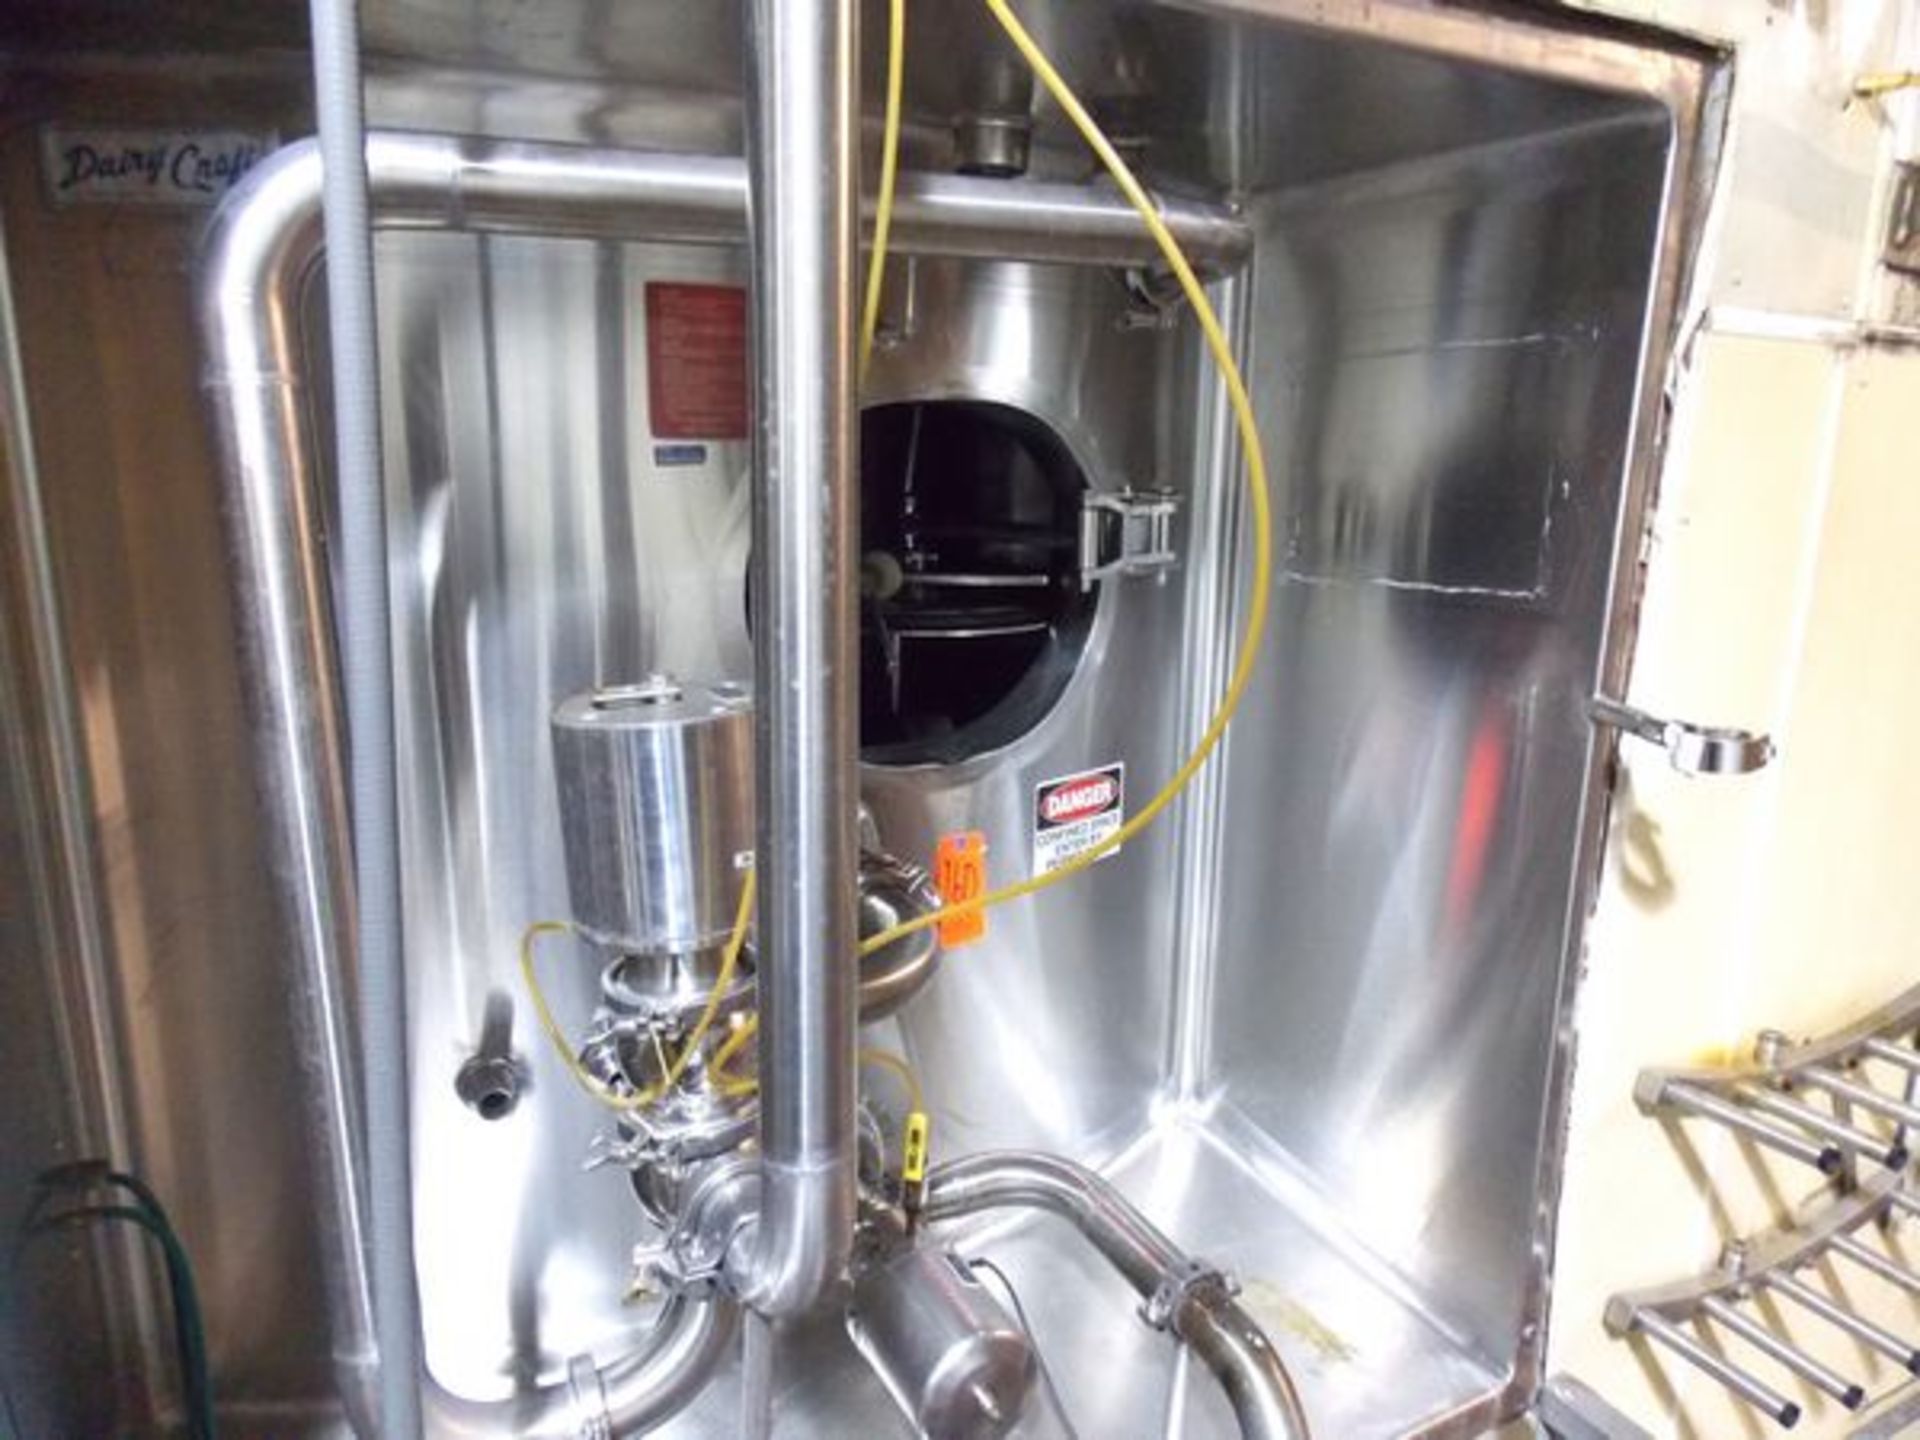 Dairy Craft 6,000 Gallon Stainless Vertical Silo with Agitator Serial: 77J3387 Stainless Steel - Image 3 of 9